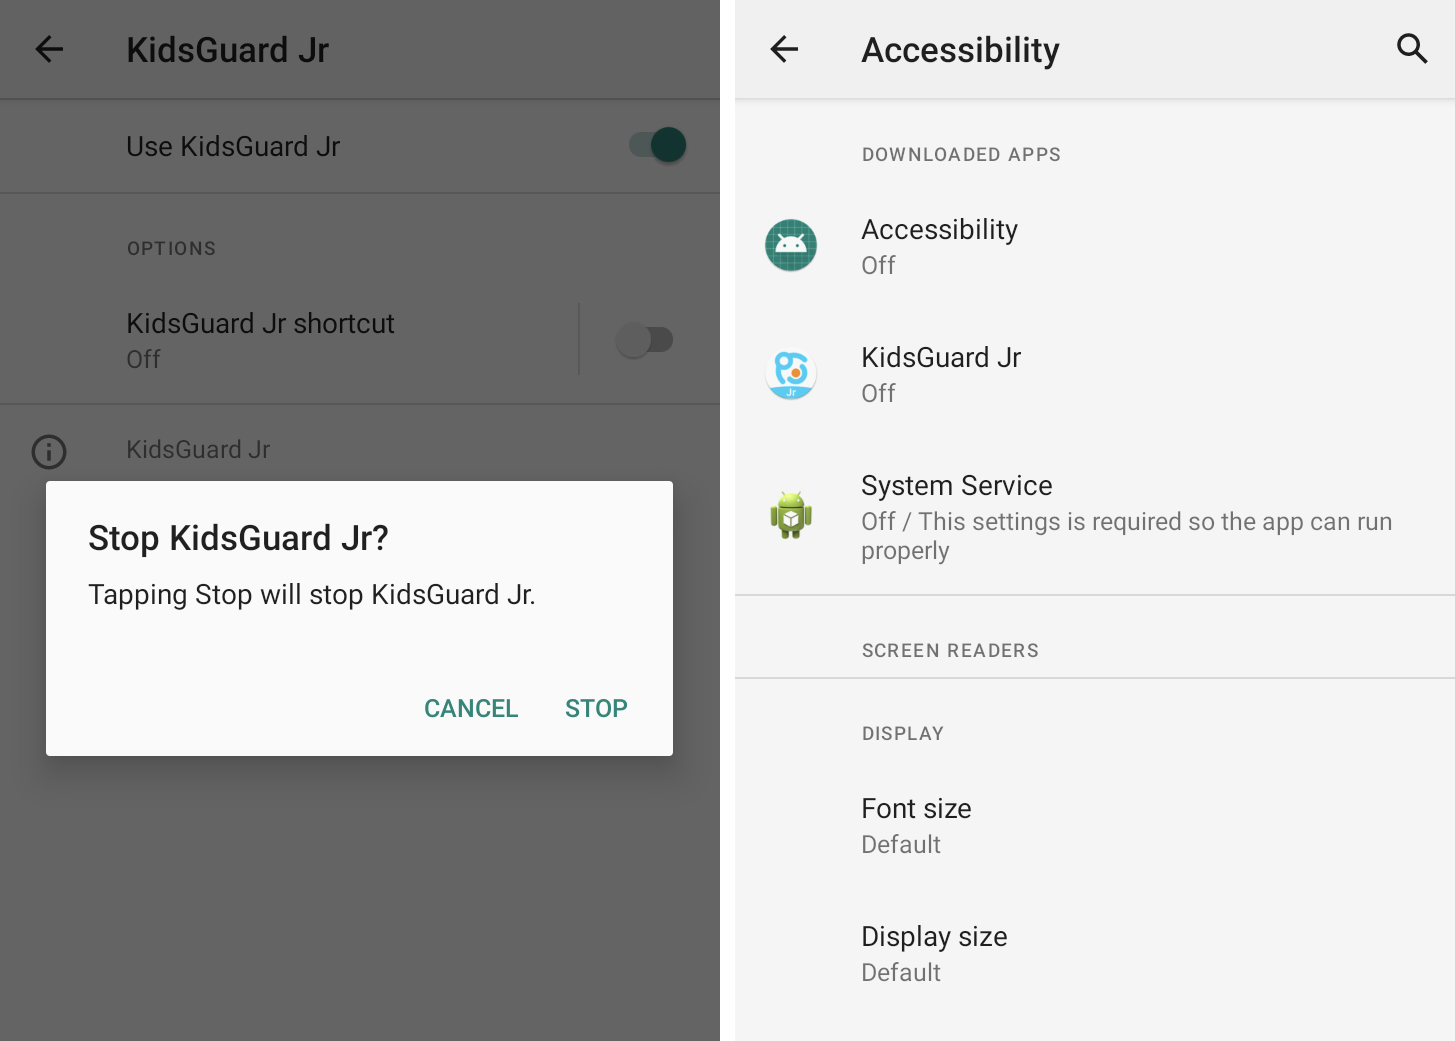 Two side-by-side screenshots showing how an app called KidsGuard hijacks Android's accessibility features to monitor unsuspecting users.  The second screenshot shows that his three stalkerware apps - Accessibility, KidsGuard, and System Service - have all been switched 